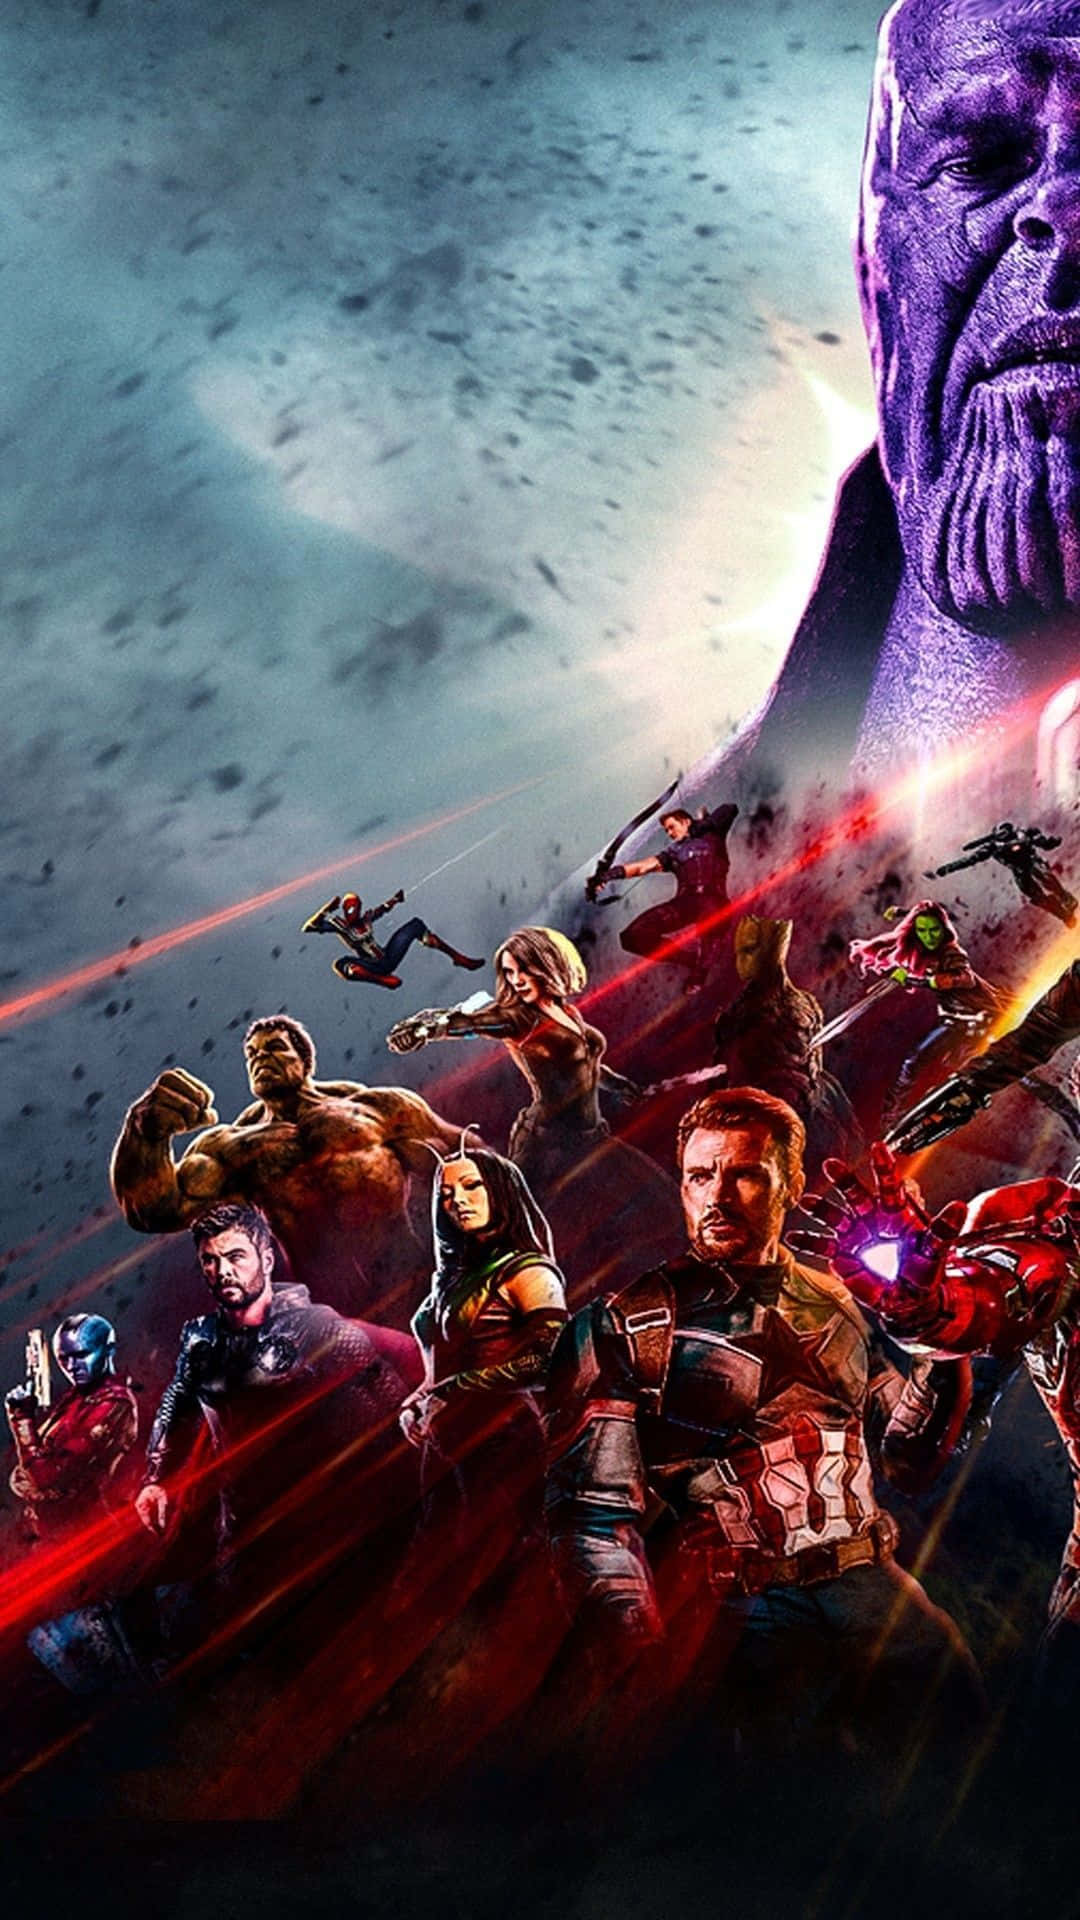 Own the Power of Avengers Endgame on the Latest iPhone Wallpaper